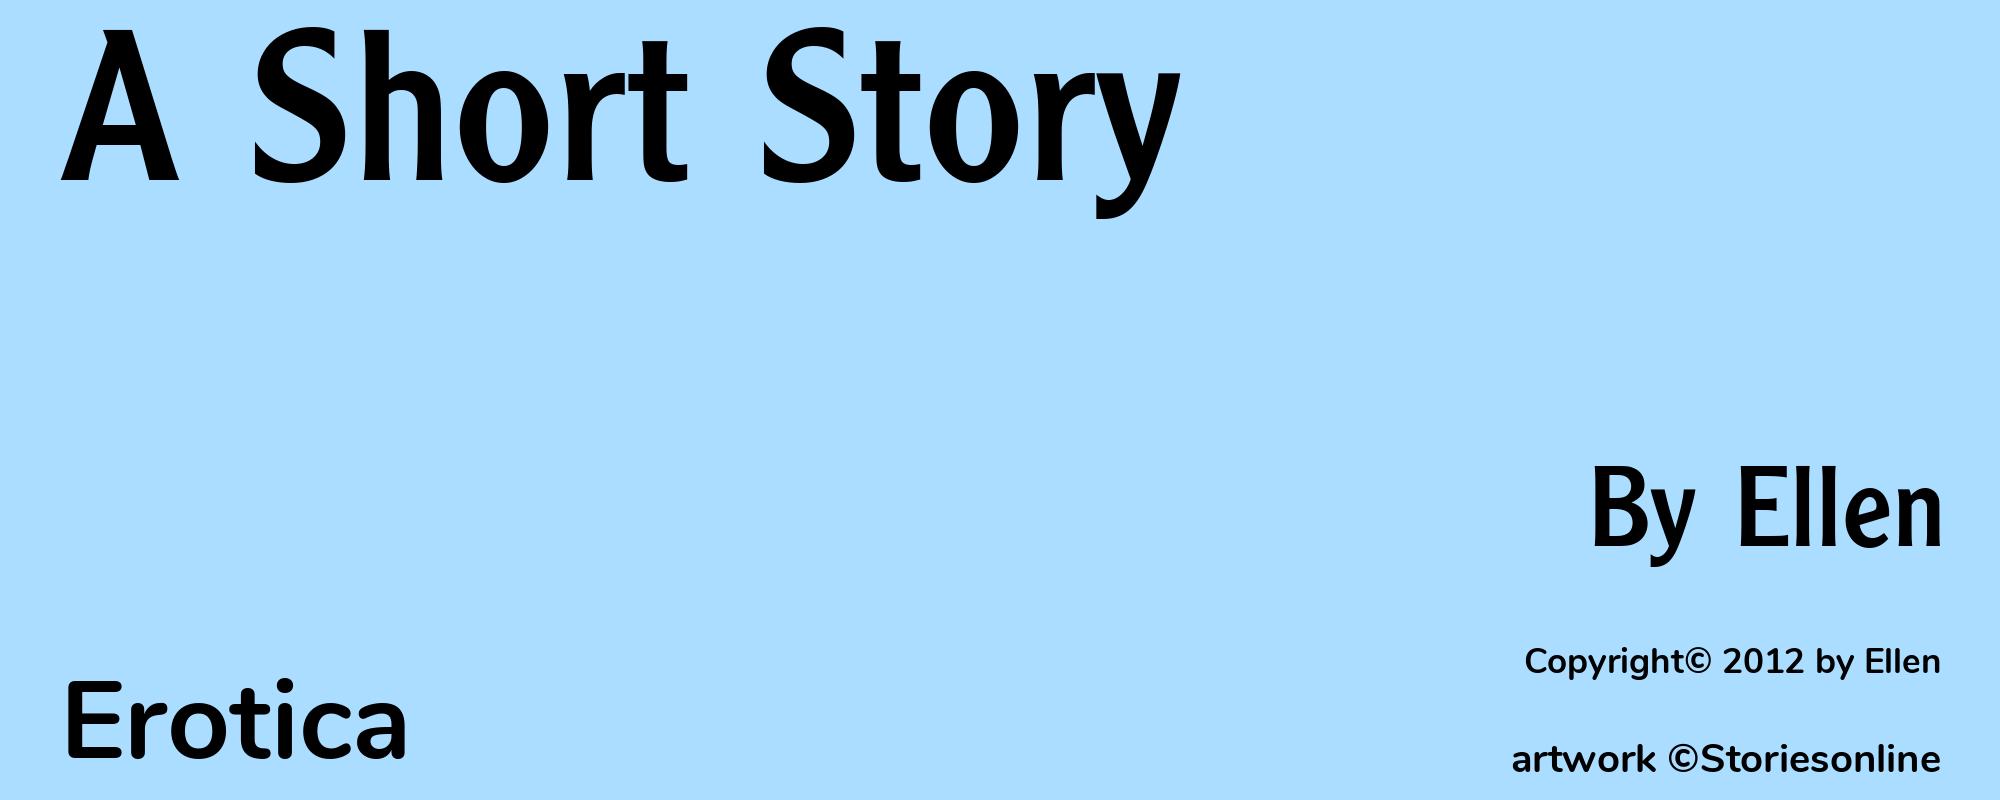 A Short Story - Cover